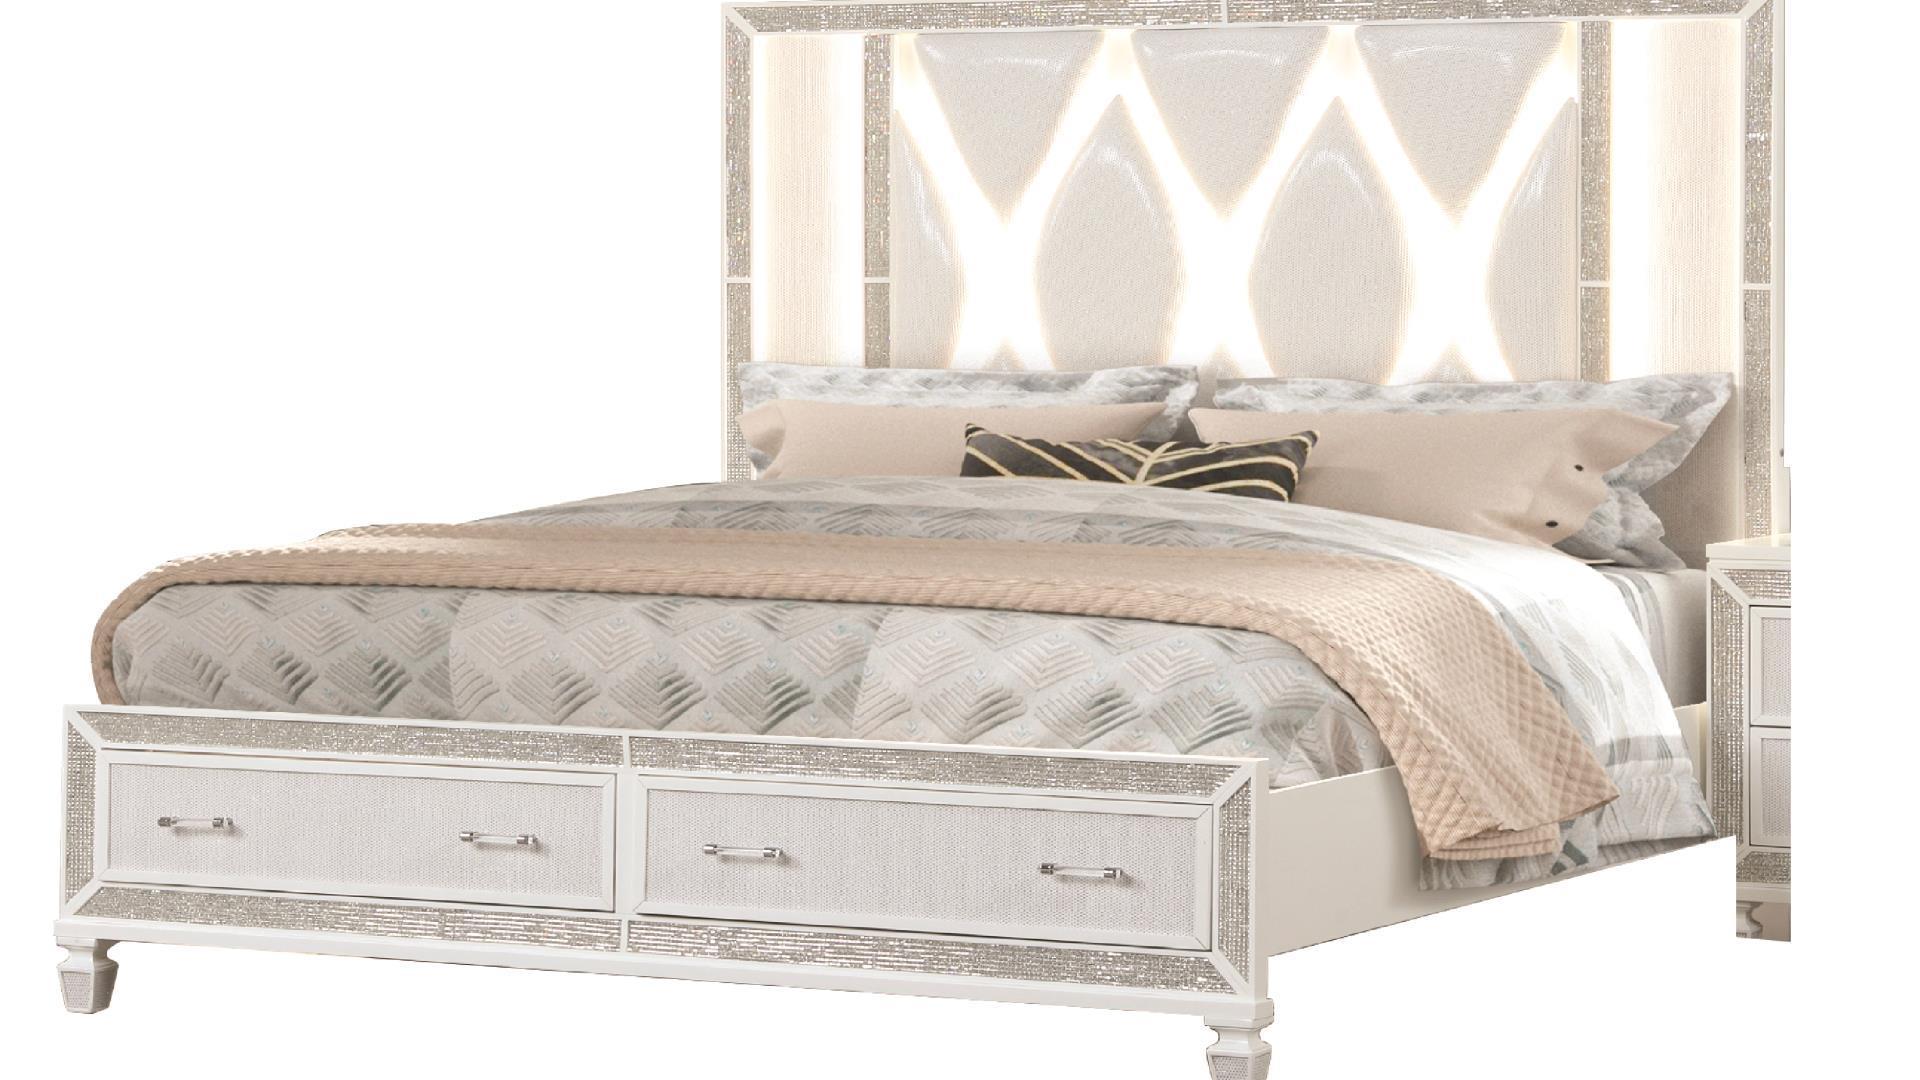 

    
Glam White Solid Wood Queen Bed CRYSTAL Galaxy Home Modern Contemporary
